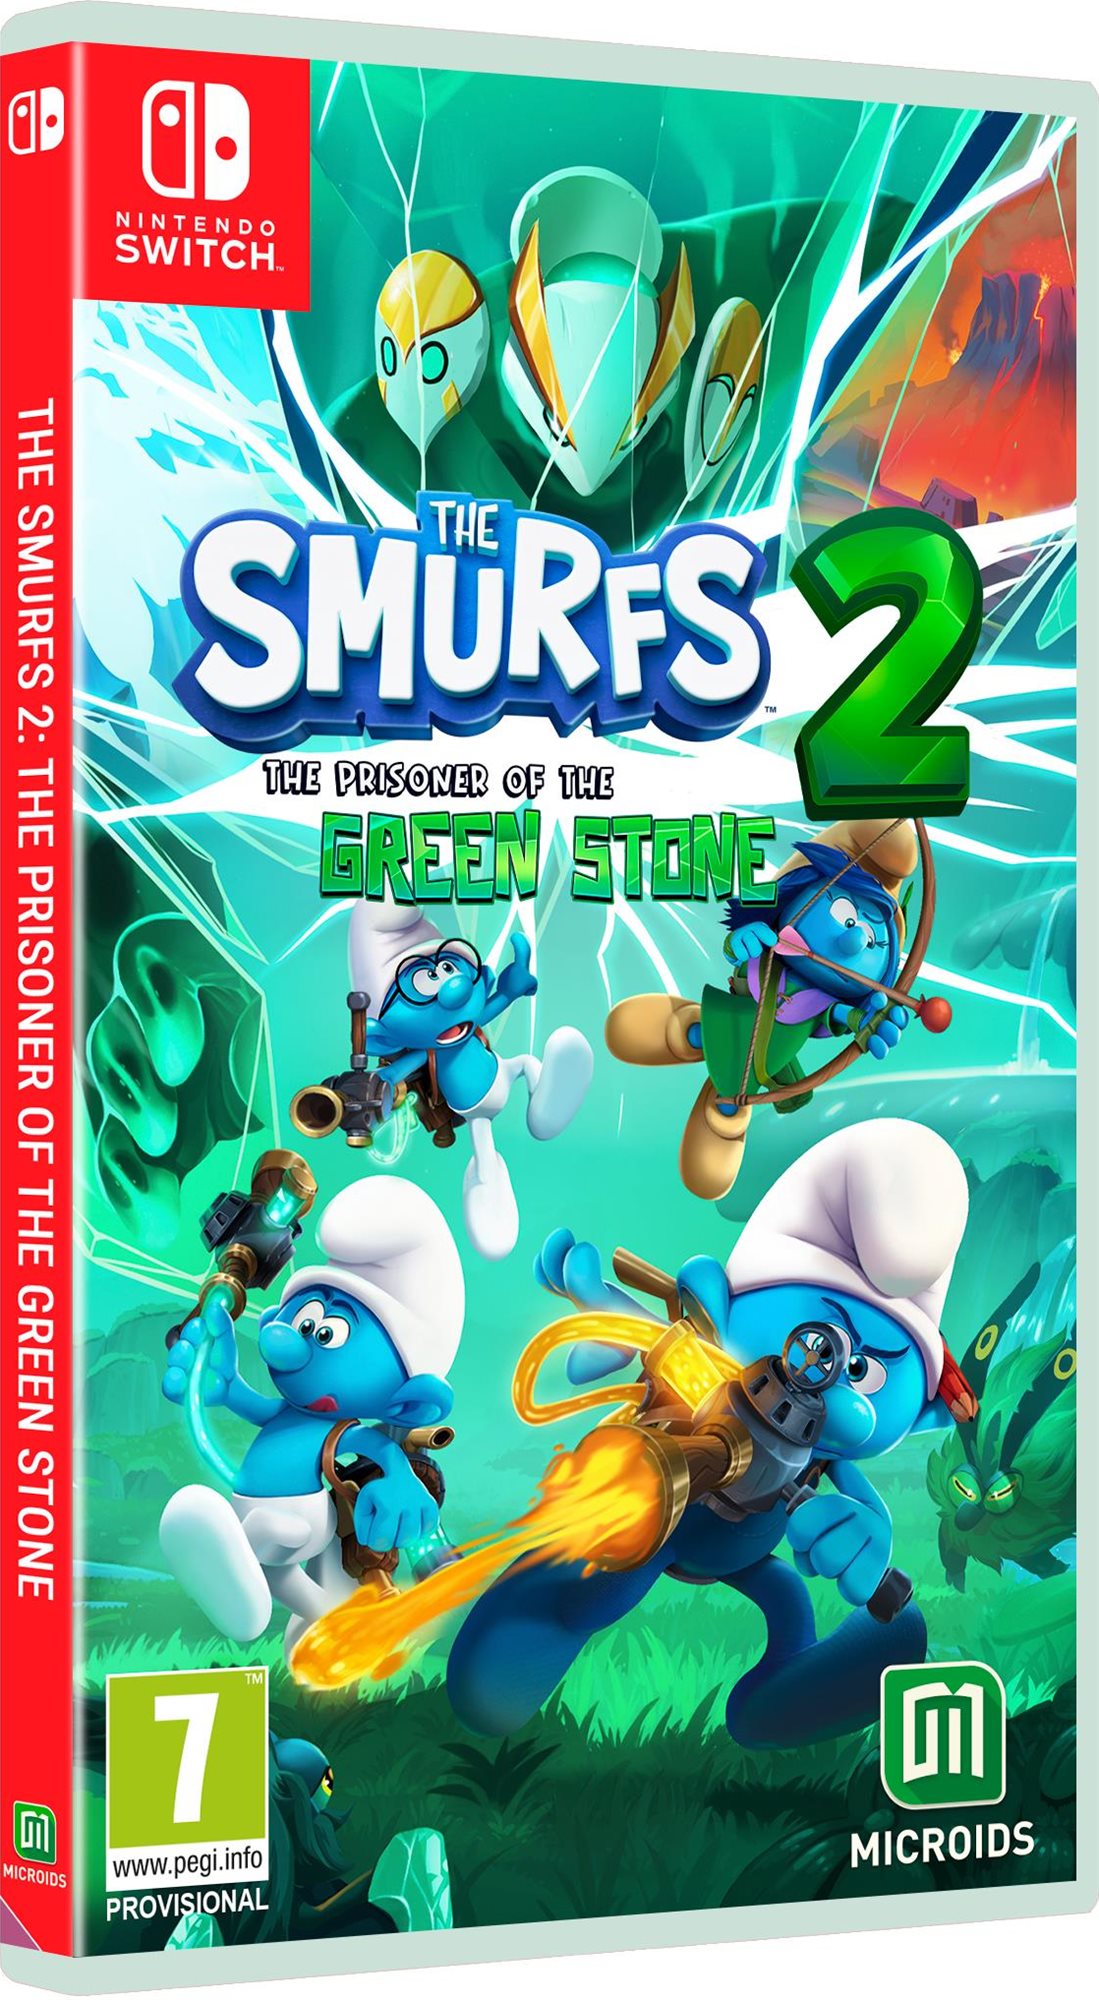 The Smurfs 2: The Prisoner of the Green Stone - Nintendo Switch